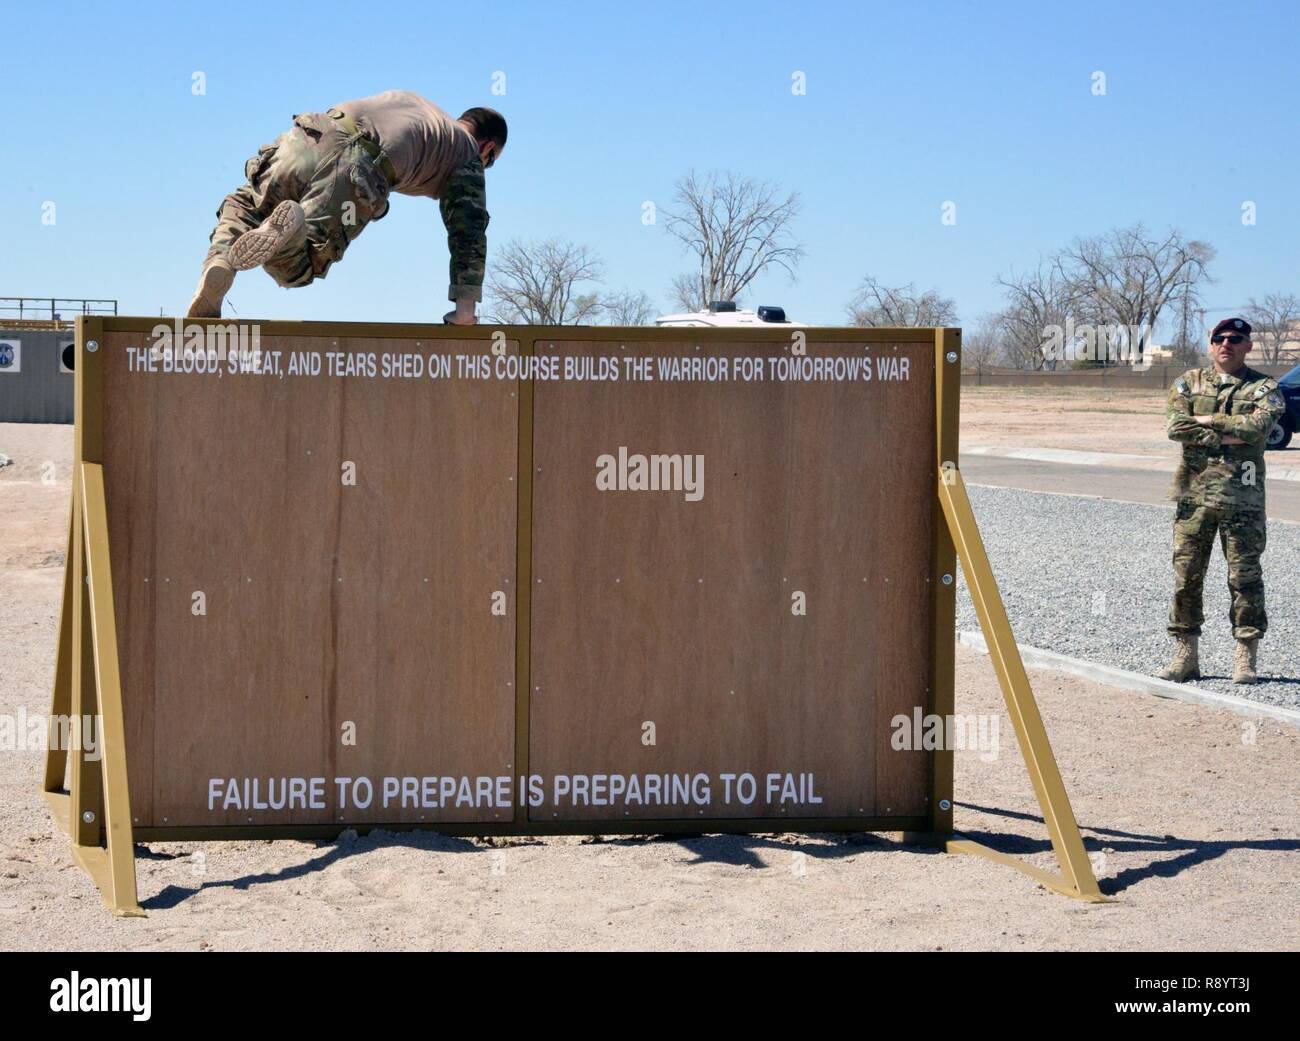 Pararescue trainees from the 351st Battlefield Airmen Training Squadron test the unit's new assault course March 17 at Kirtland. The course includes challenges like low crawls, rope and rock climbing, and jumping over a high wall, and will be used in training BATS students. Stock Photo